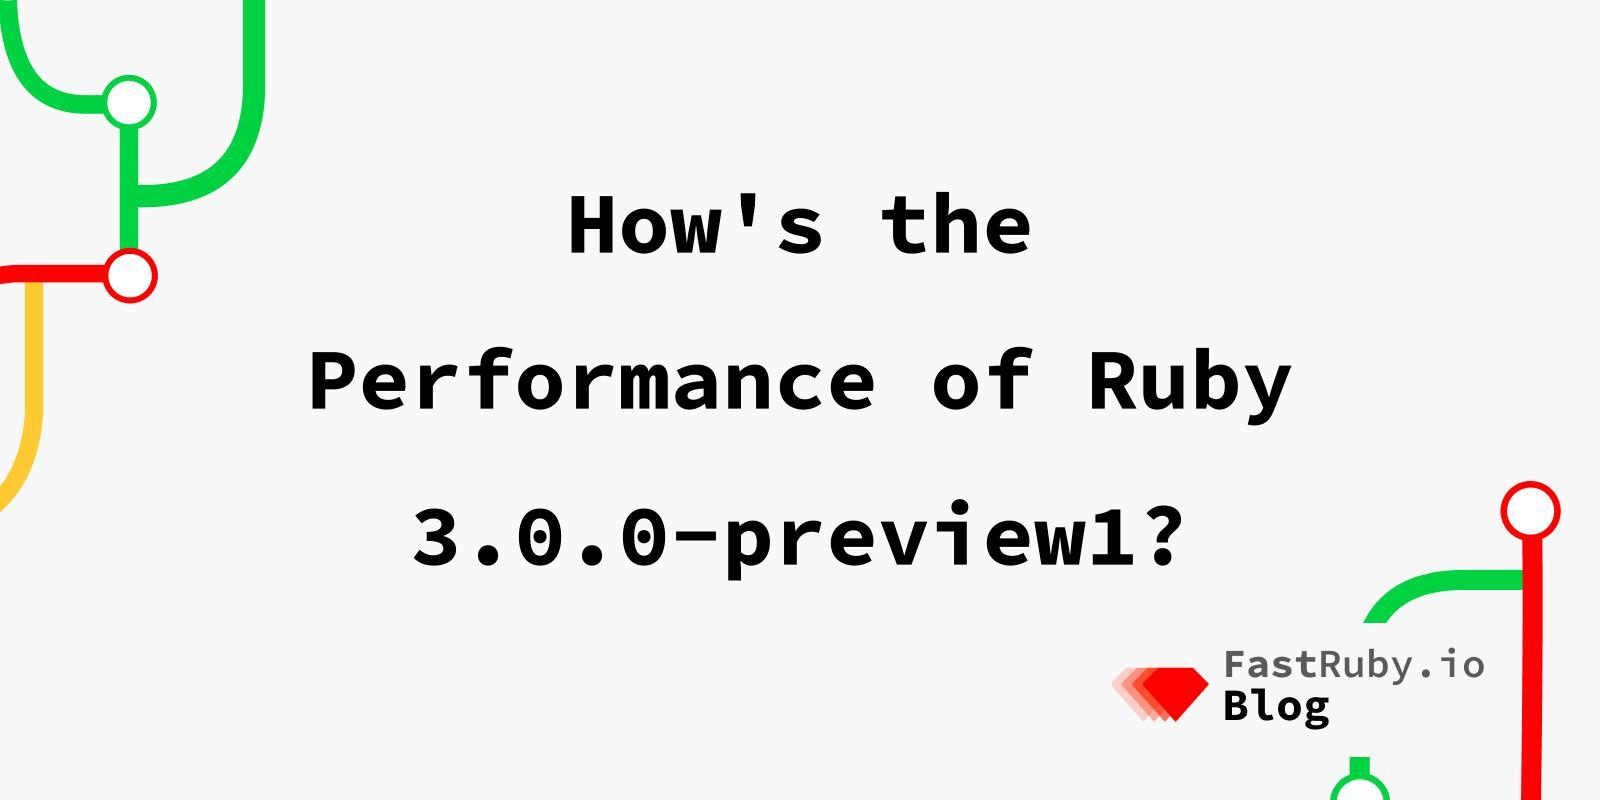 How's the Performance of Ruby 3.0.0-preview1?